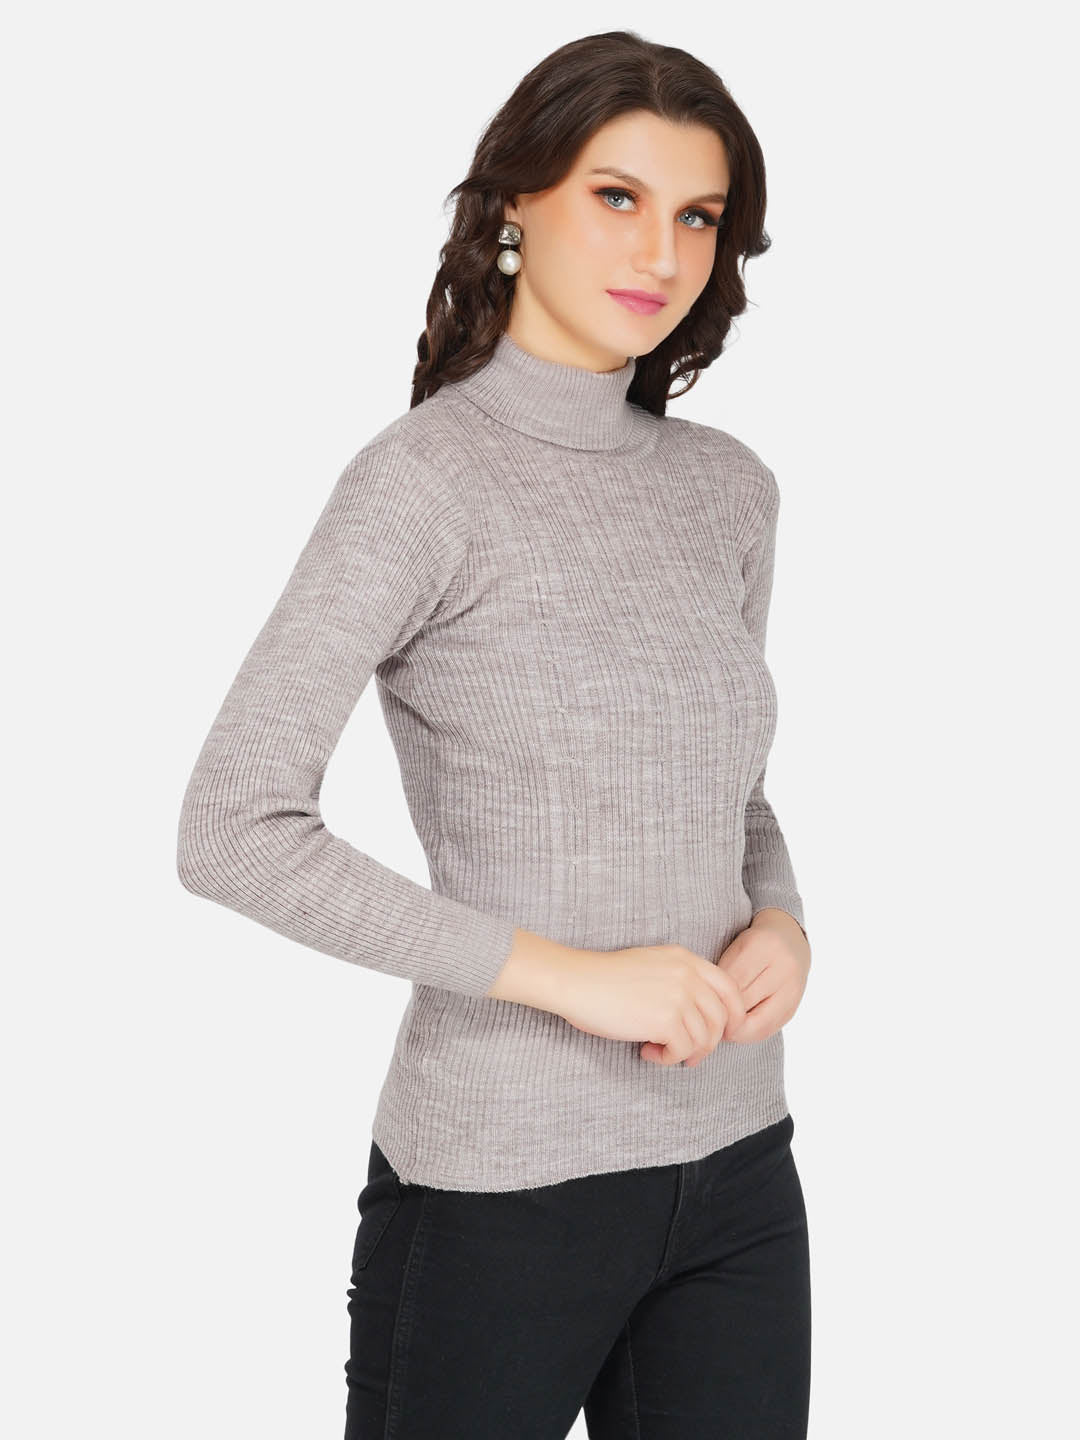 Grey Cable Design High Neck Knitted Sweater